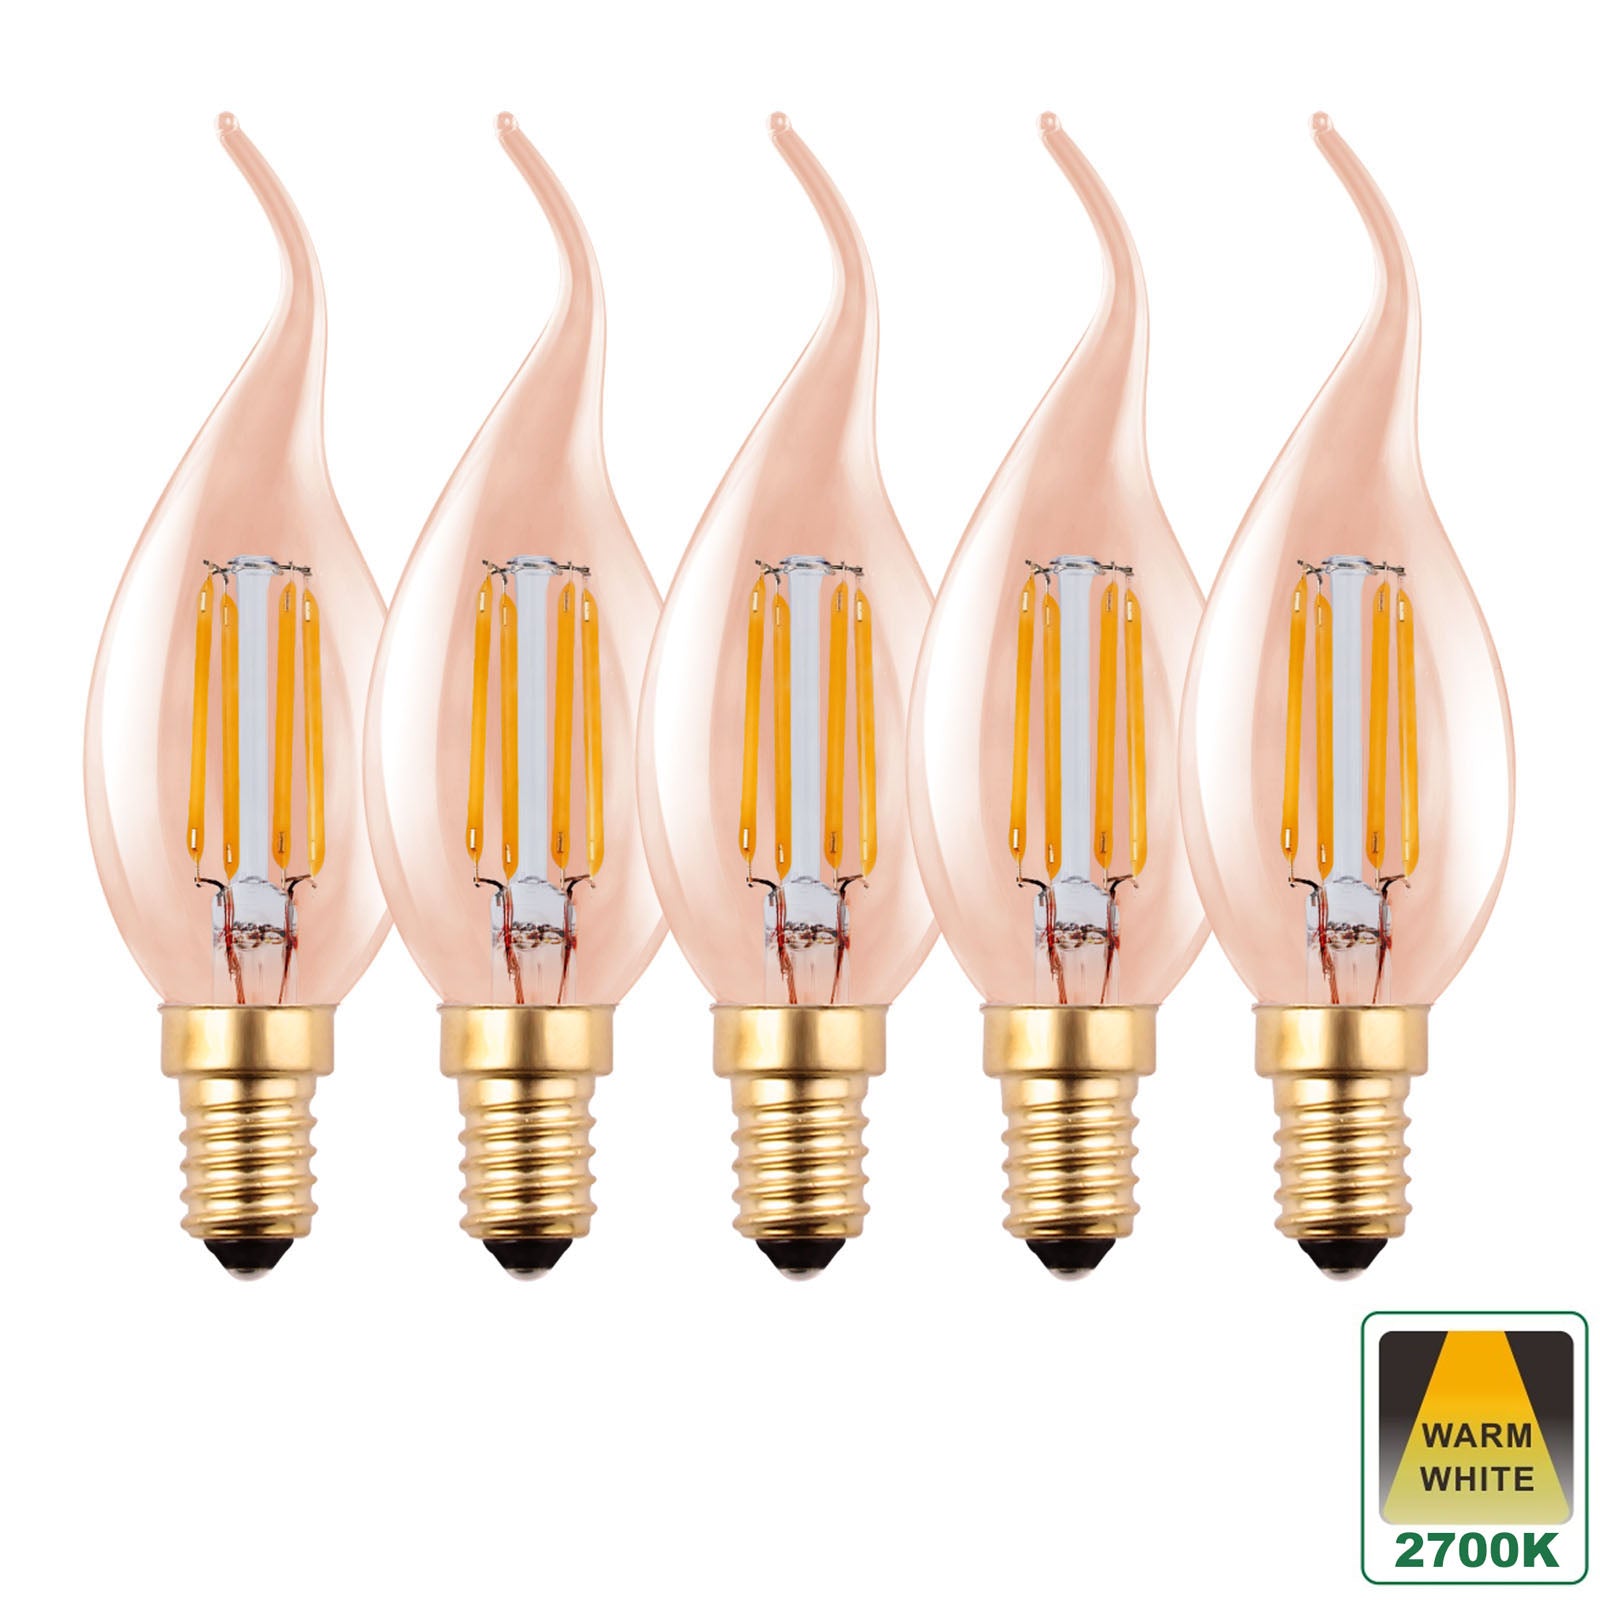 Harper Living E14 4.5W Amber Glass Warm White Dimmable Bent Tip Candle LED Bulbs, Pack of 5